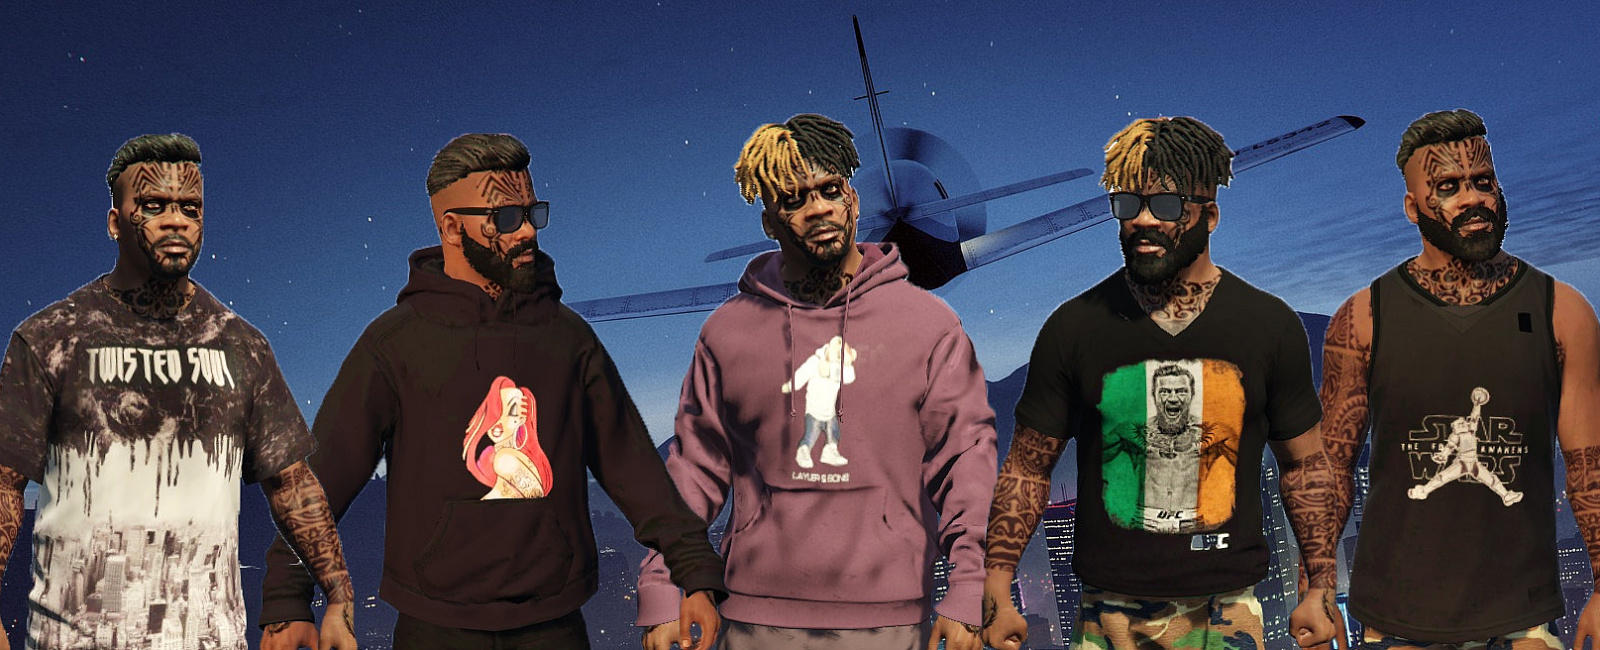 GTA 5 for PS5 and Xbox Series will get Character Transfer feature